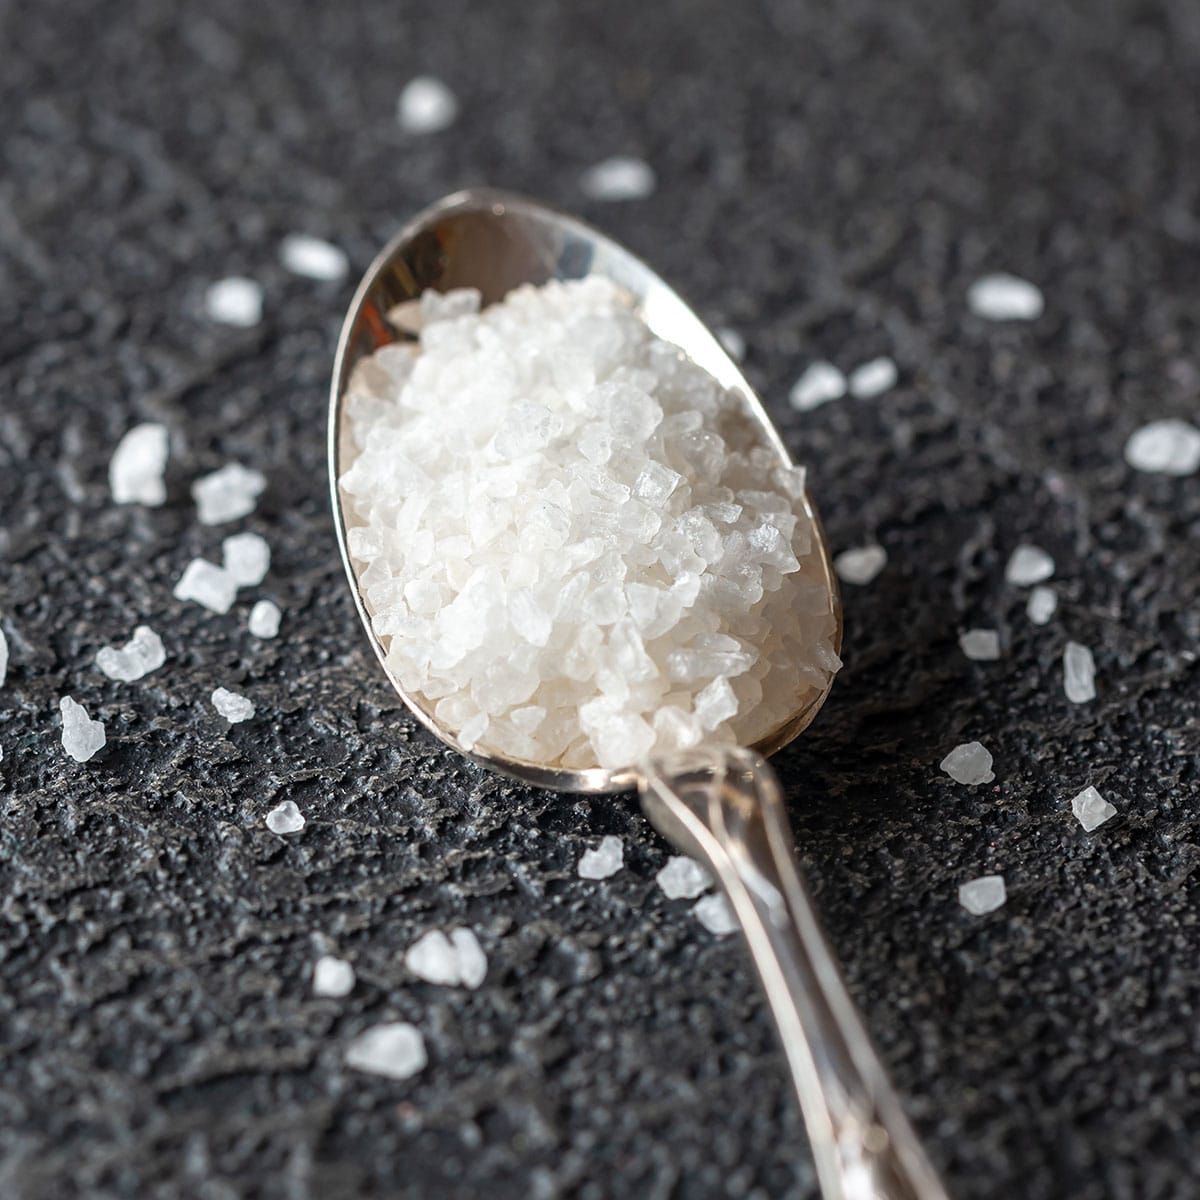 This article is all about adding the right amount of salt to not only make your food taste delicious but to keep you healthy too.